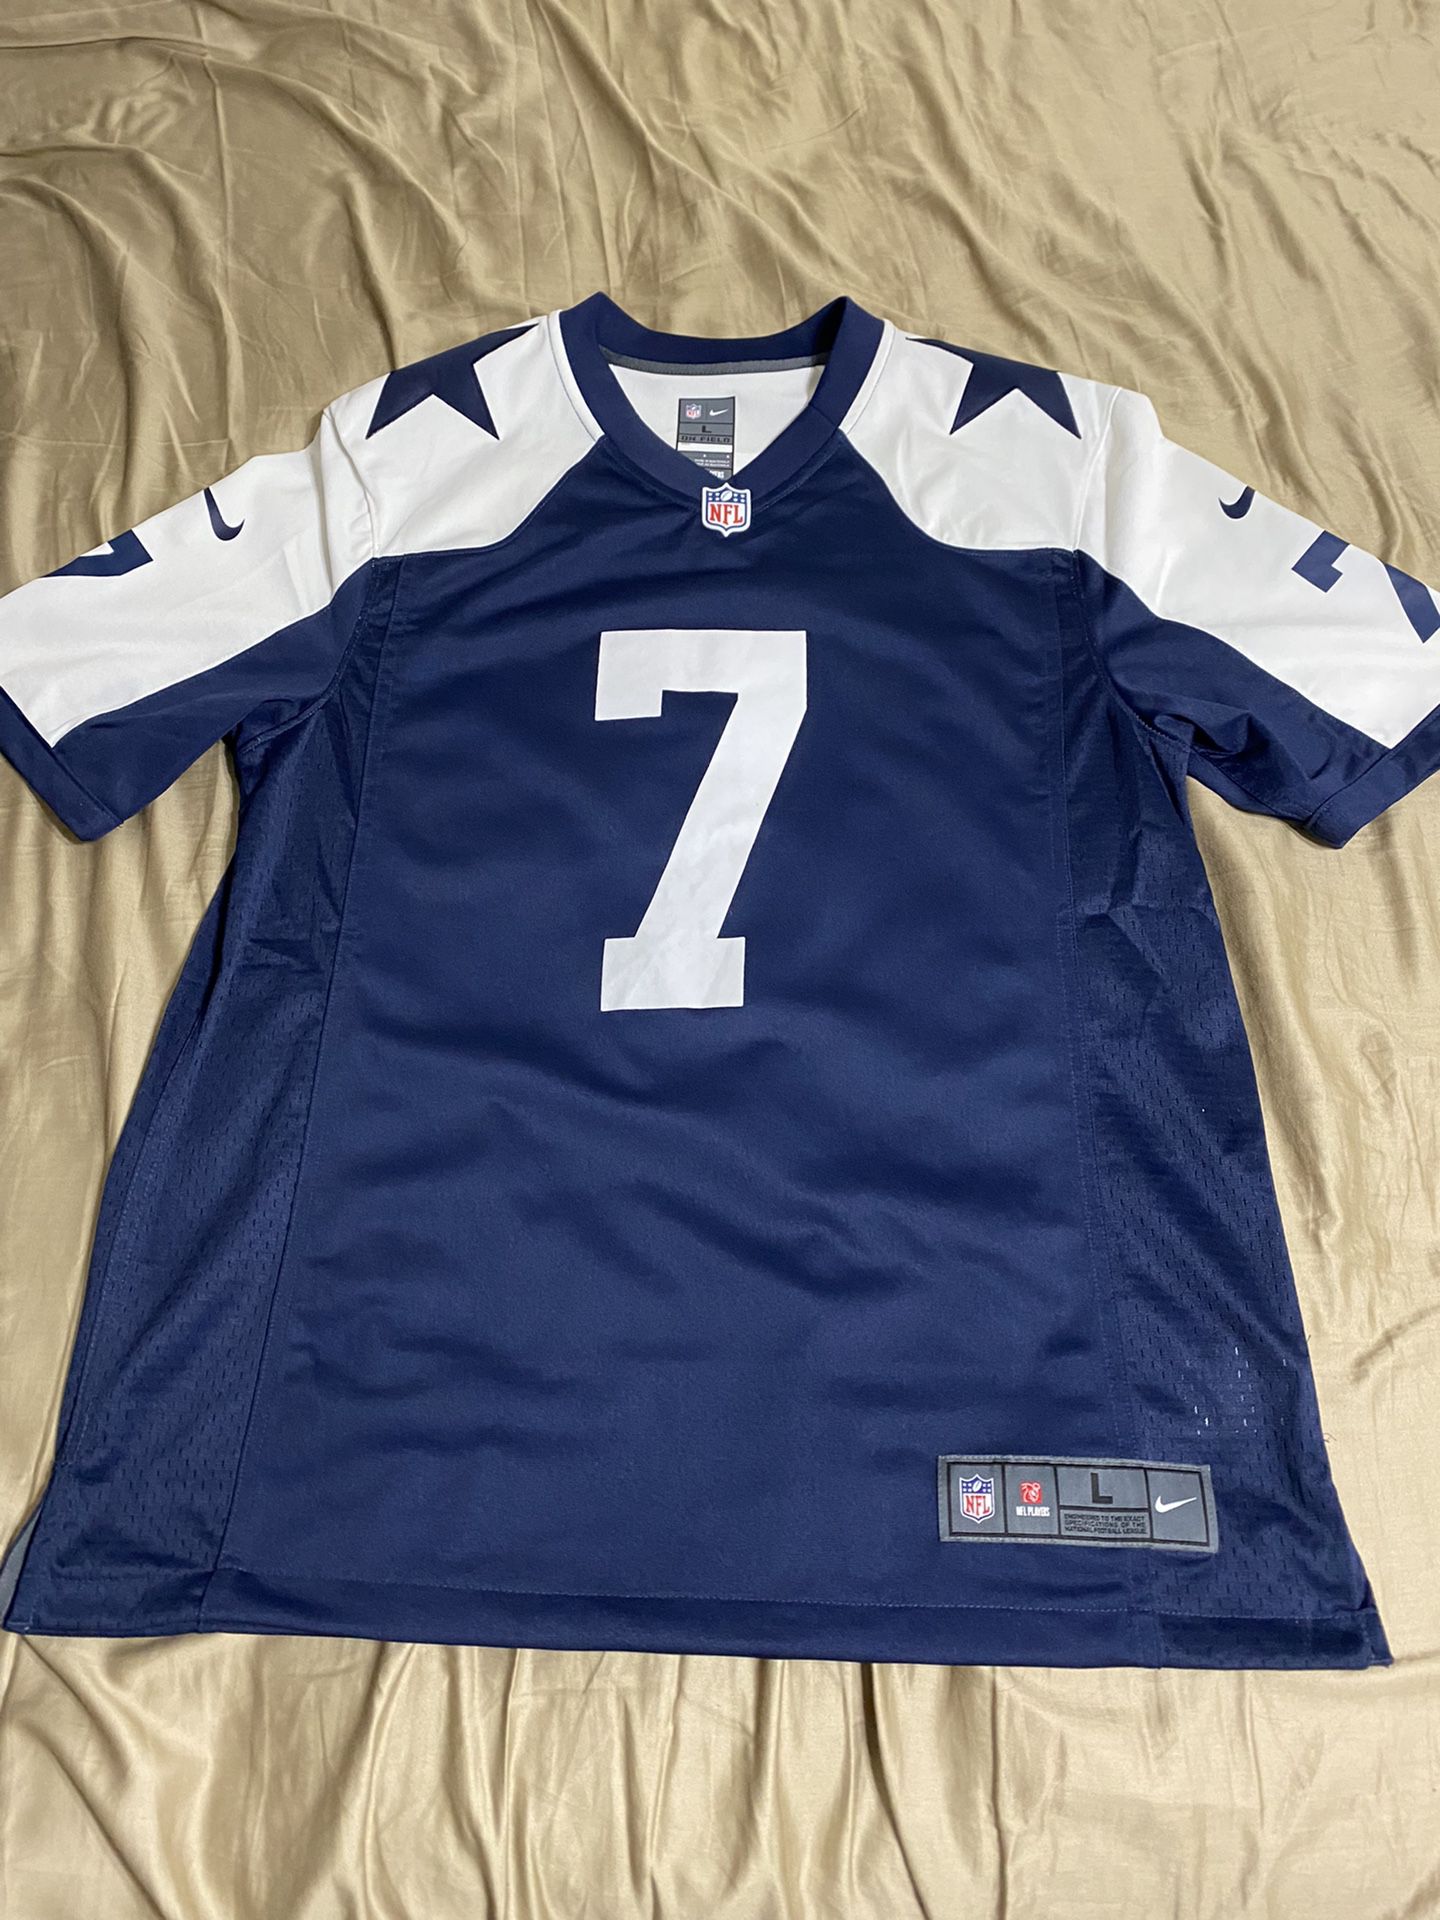 Trevon Diggs Jersey Large for Sale in San Antonio, TX - OfferUp